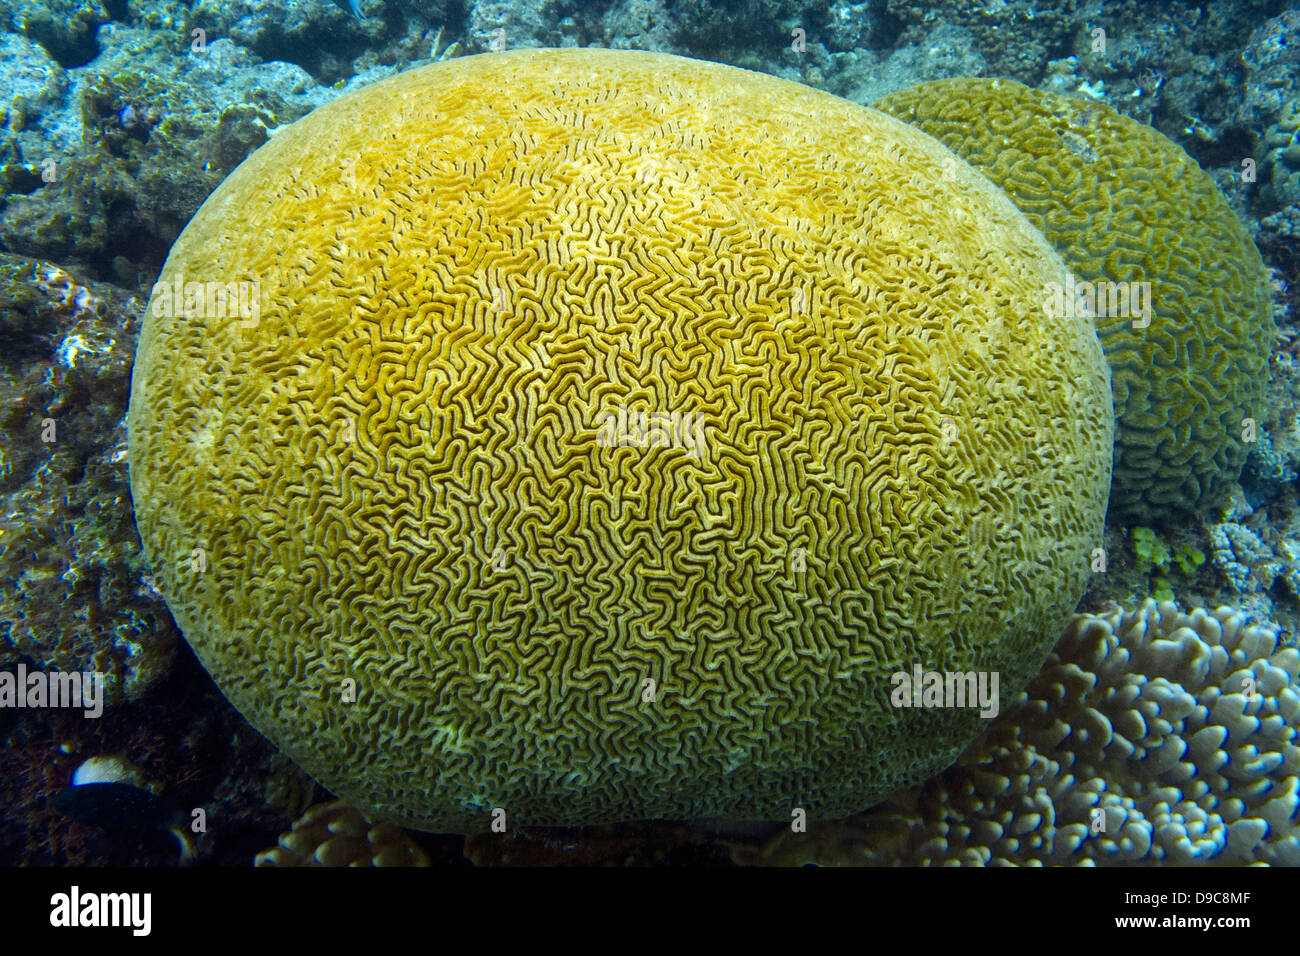 Yellow brain coral formations, The Great Barrier Reef, Queensland, Australia Stock Photo